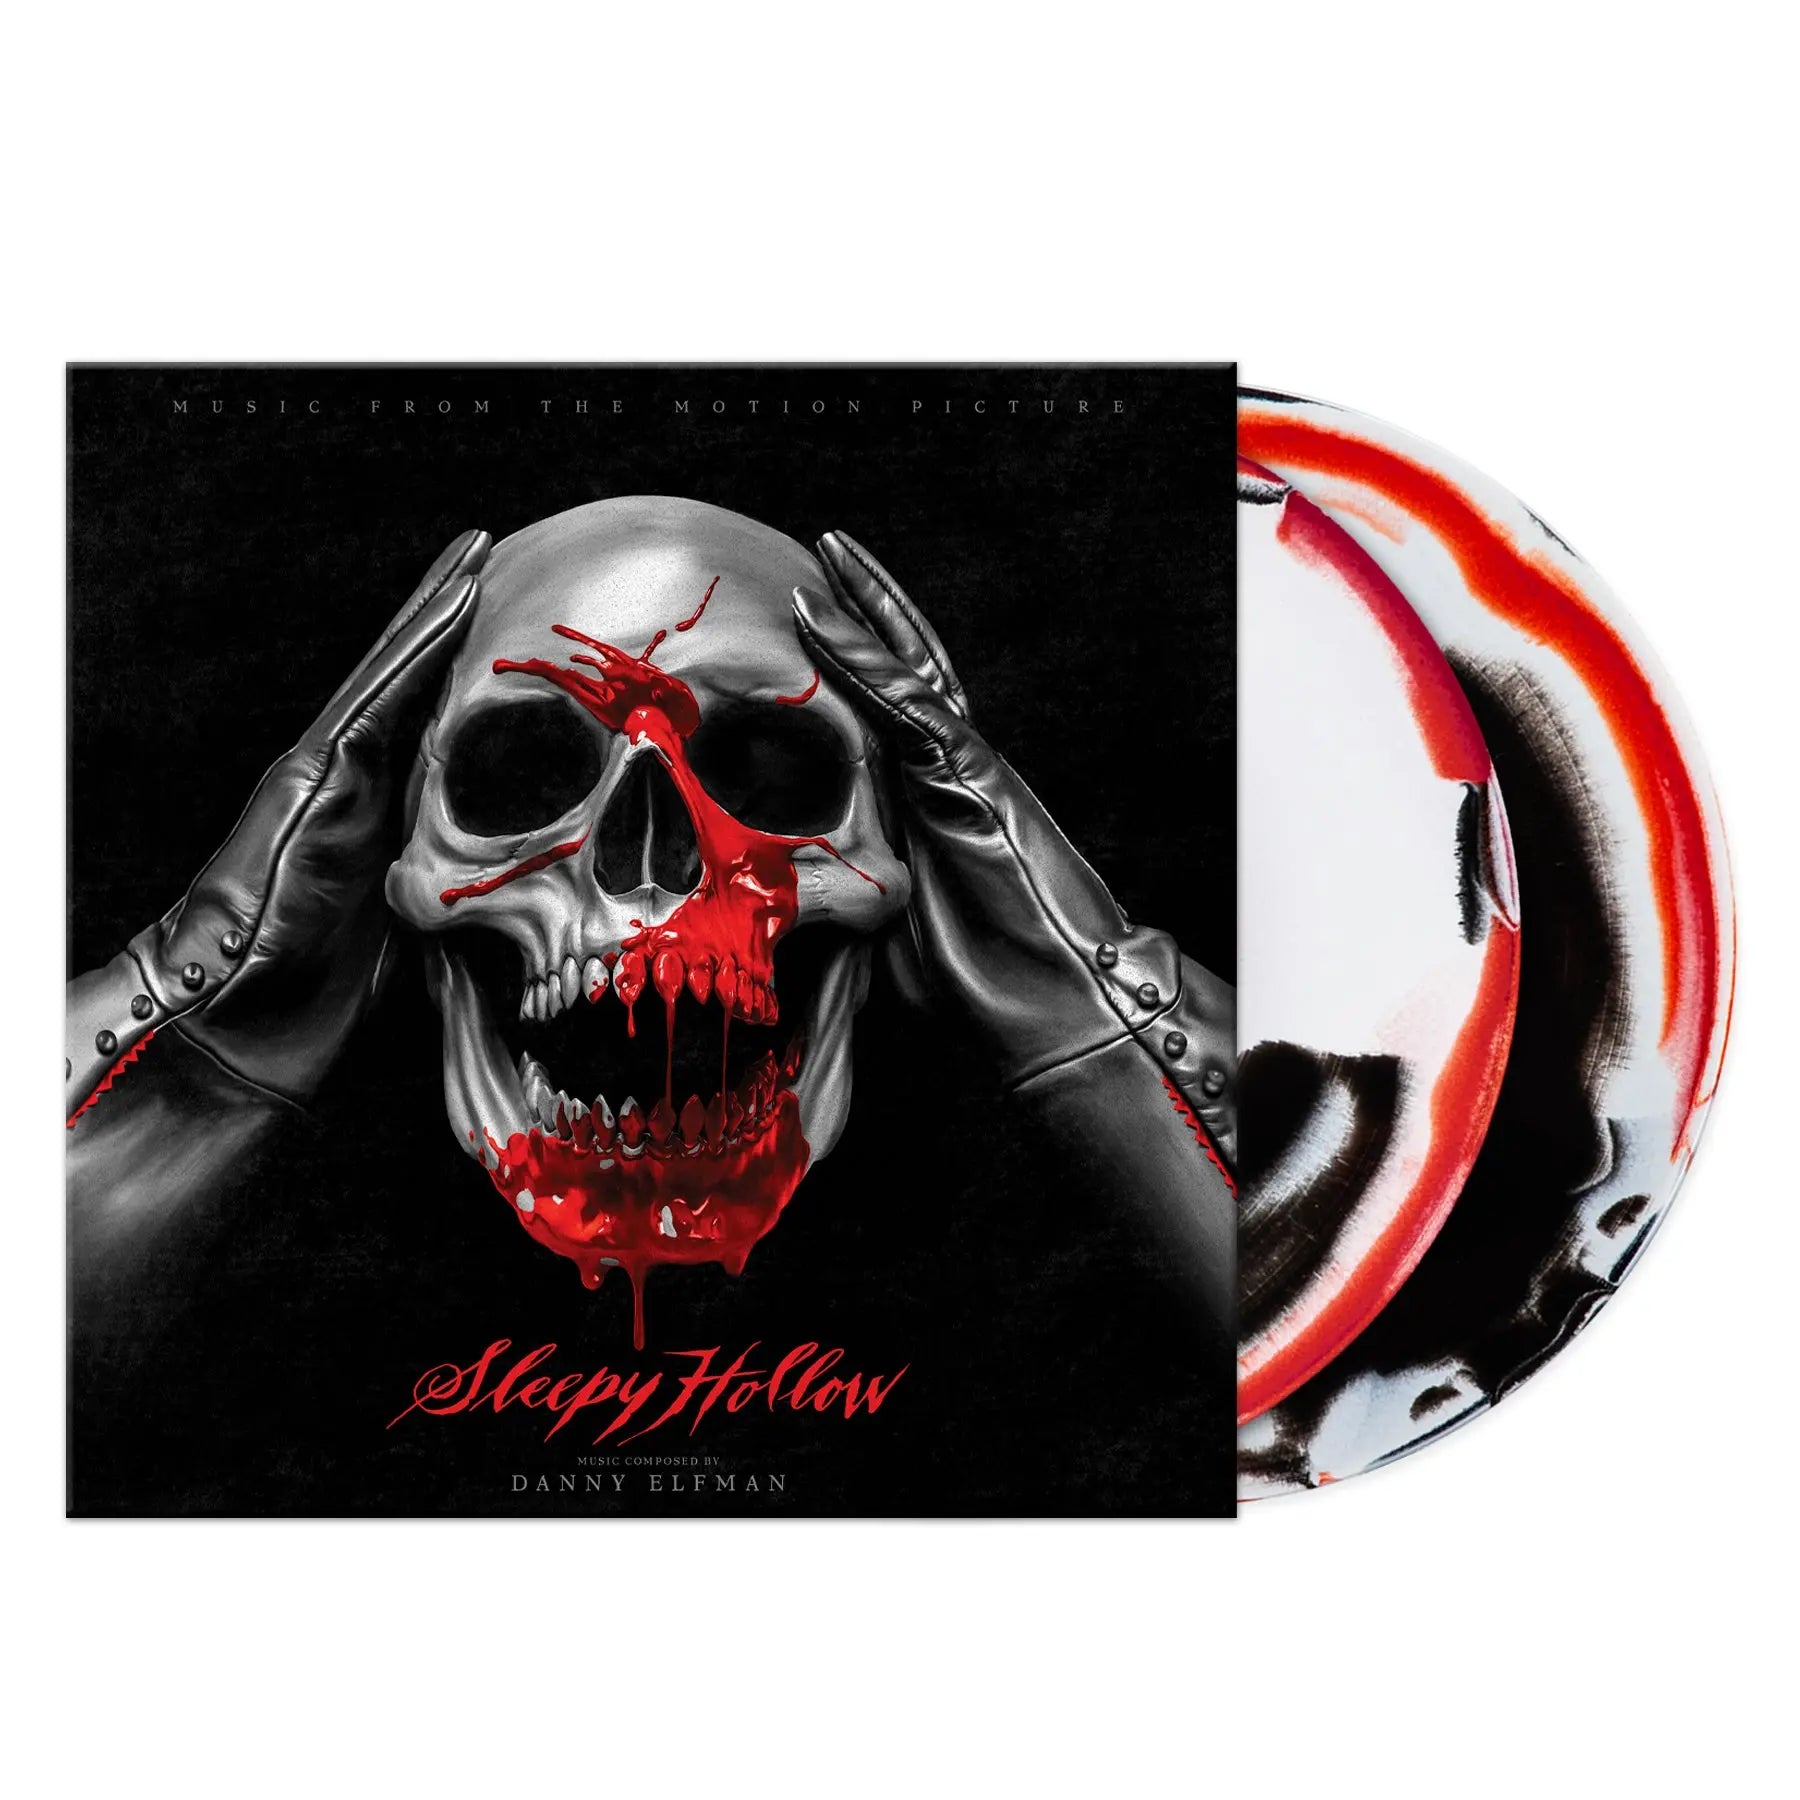 Danny Elfman - Sleepy Hollow: Music From The Motion Picture [180 Gram Skull White & Blood Red & Black Steed Swirl Colored Vinyl 2LP]